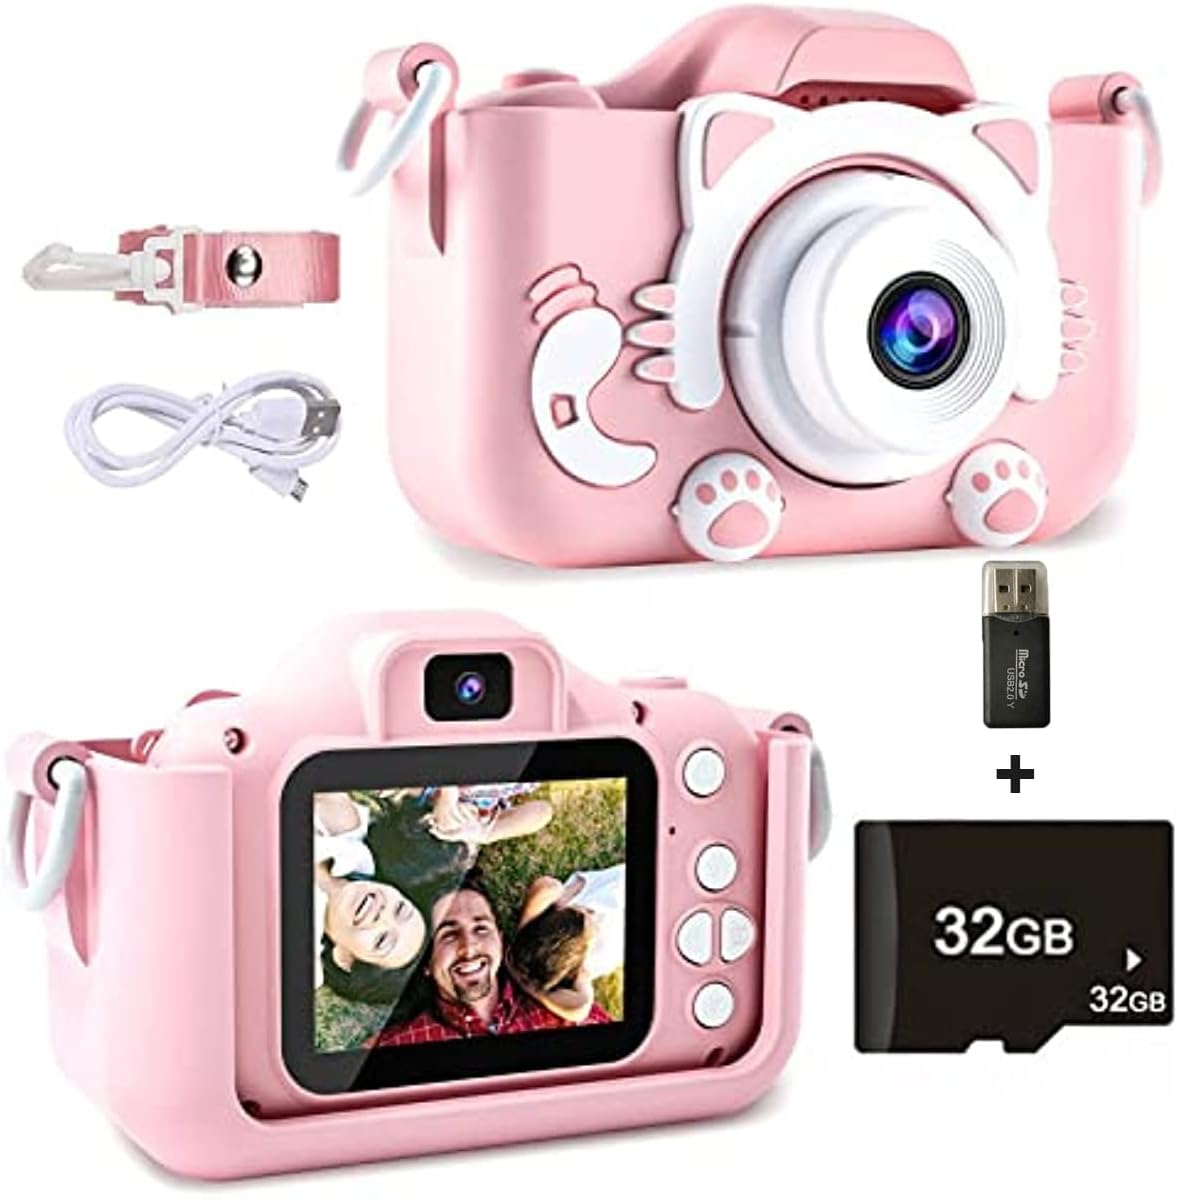 Malay Kids Camera,1080P HD Digital Video Camera Toy for 3-12 Year Old Boys/Girls, Birthday Festival Gifts for Kids,USB Rechargeable Kids Selfie Camera with 32GB SD Card and card reader(Pink)